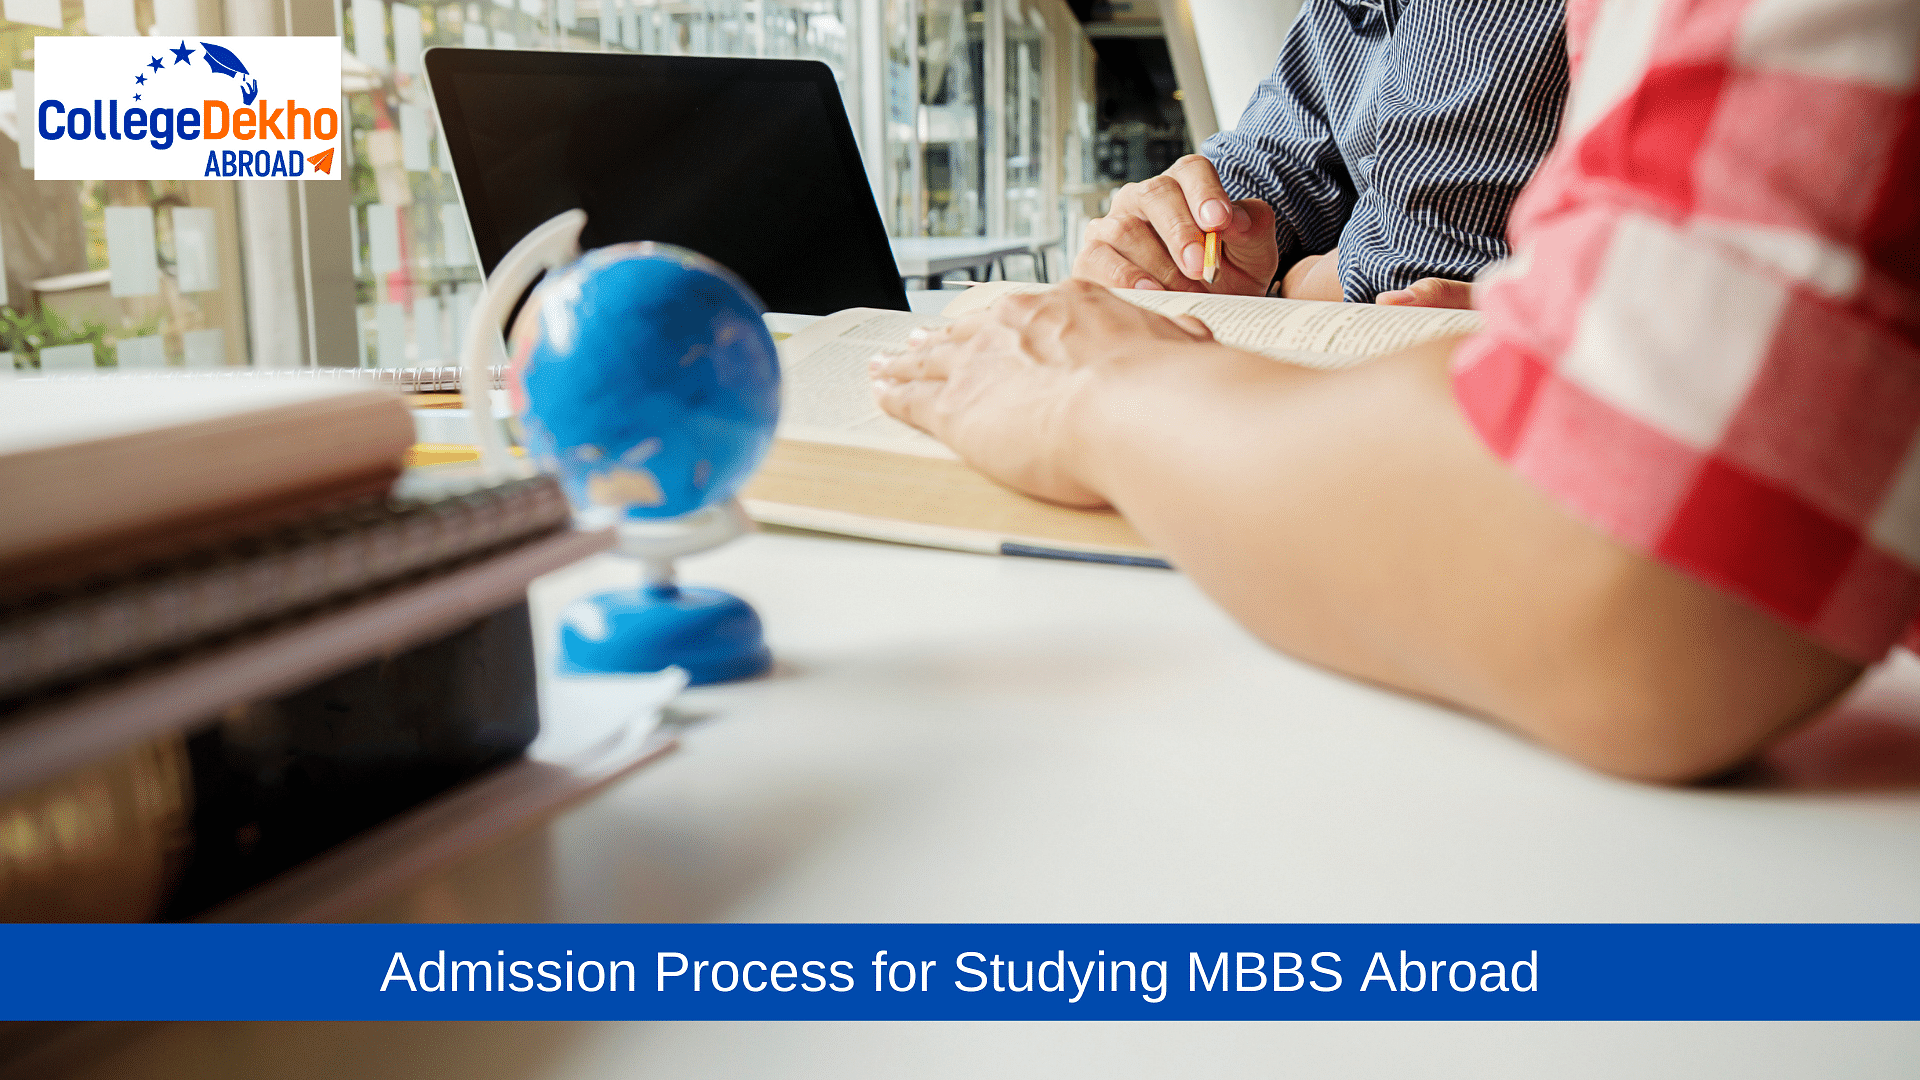 Admission Process for MBBS Abroad